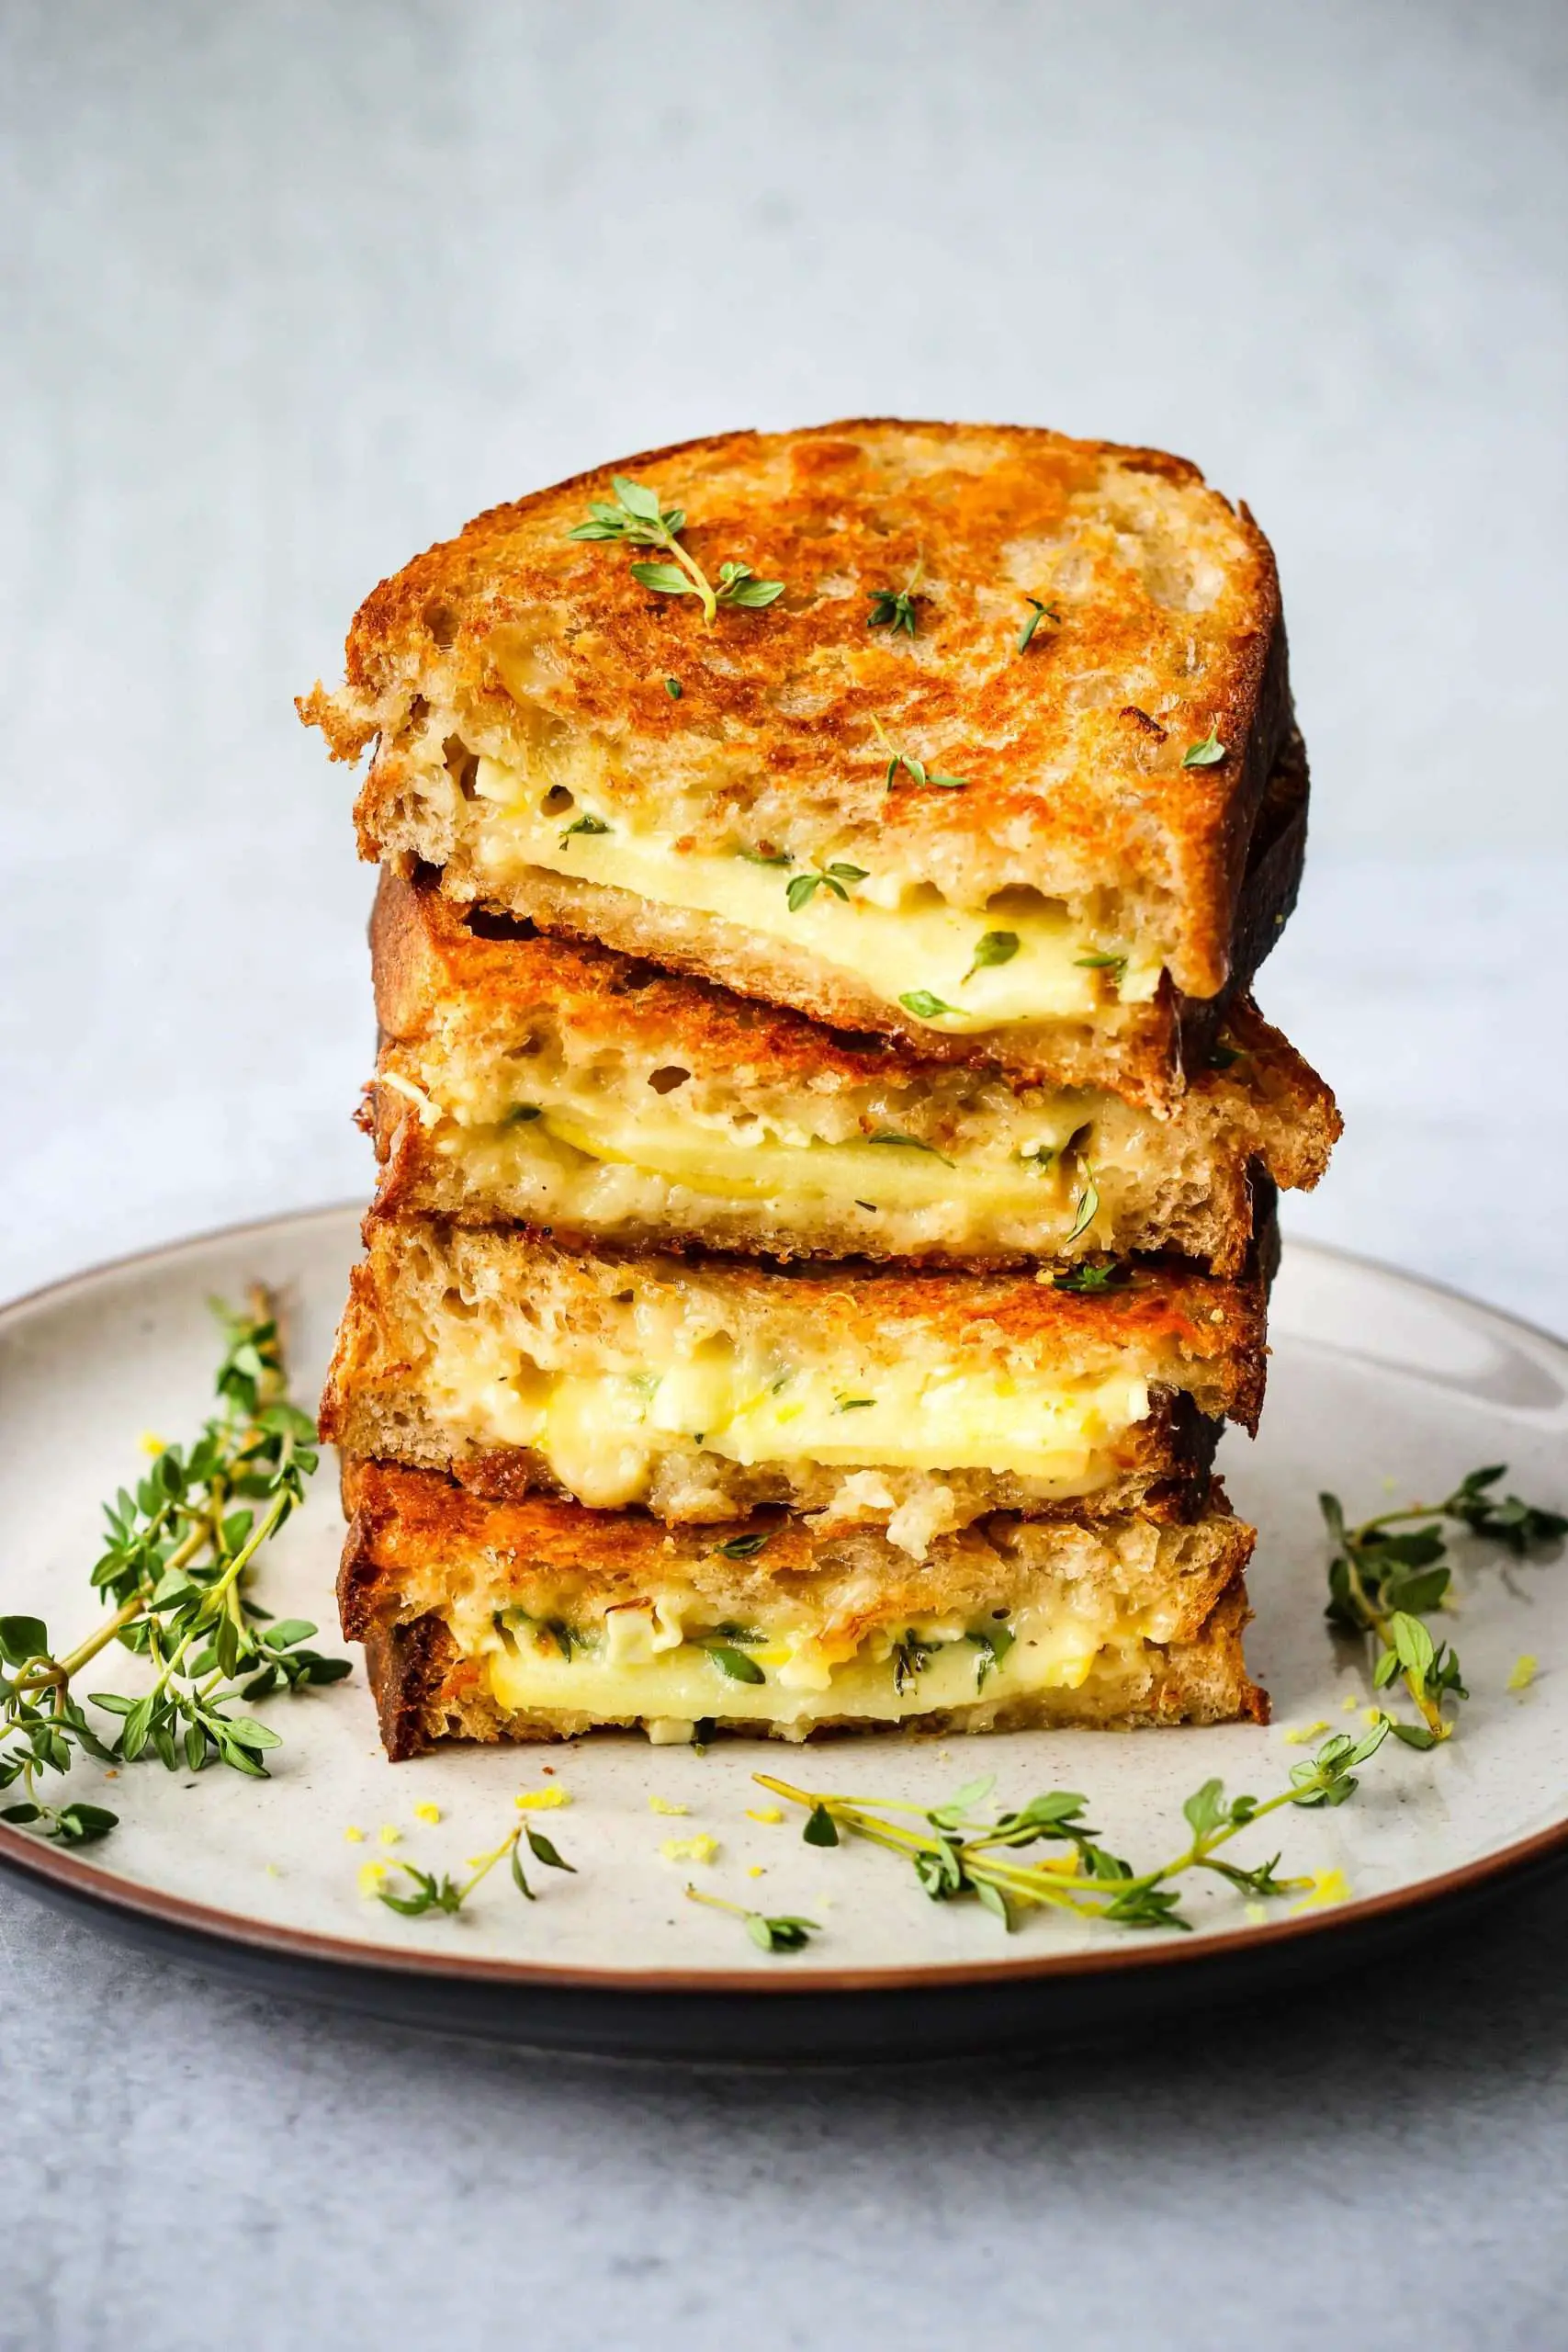 The BEST Gourmet Grilled Cheese Sandwich